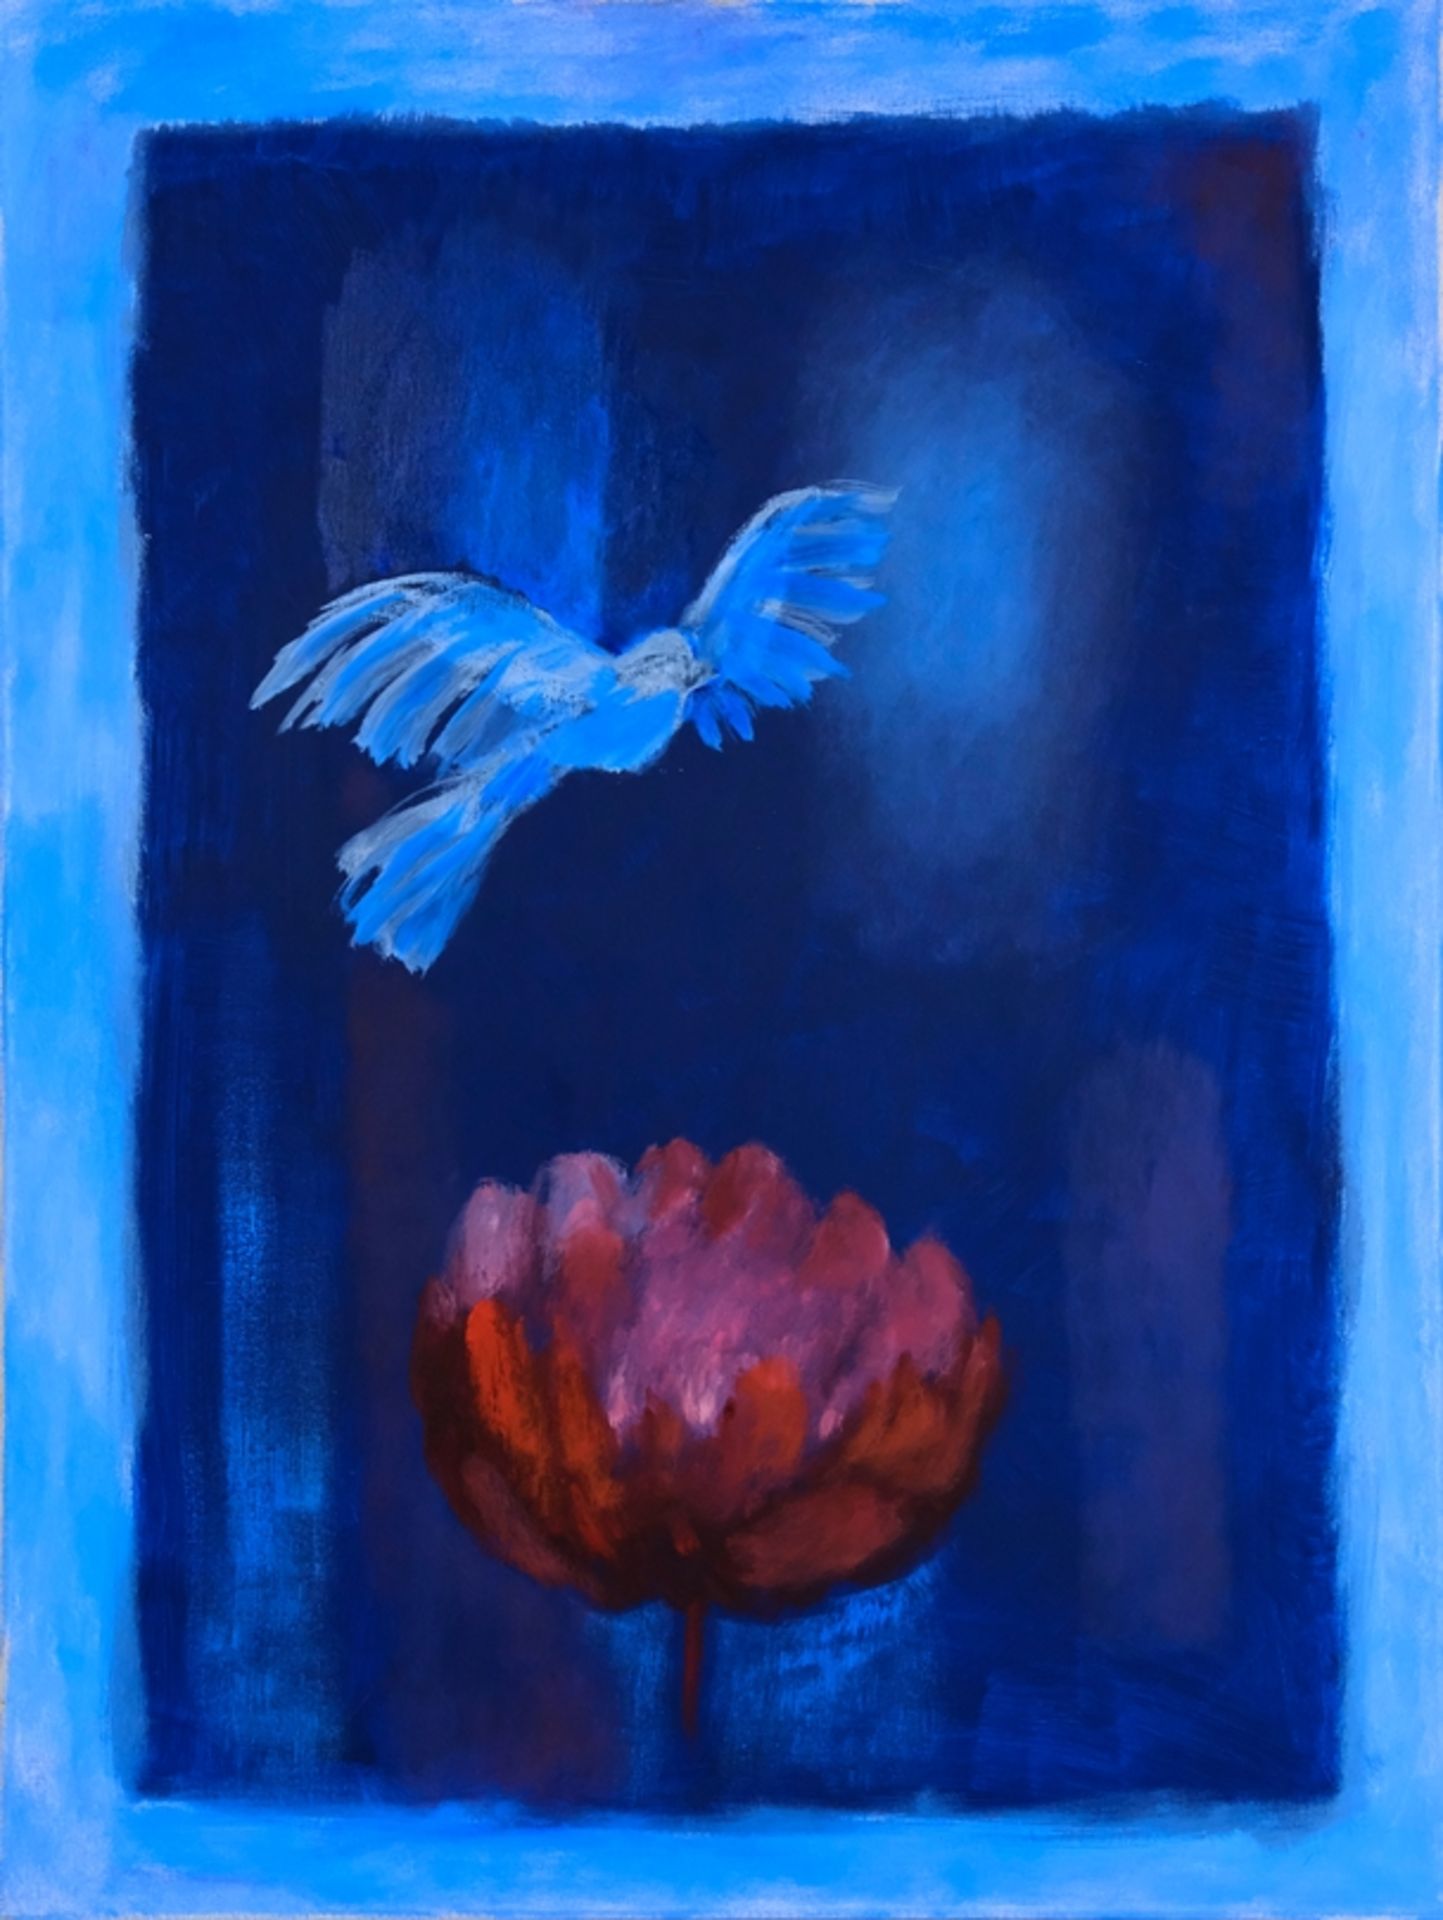 Seywirth, Günther (born 1940) attributed to Dove of Peace, oil on canvas. 